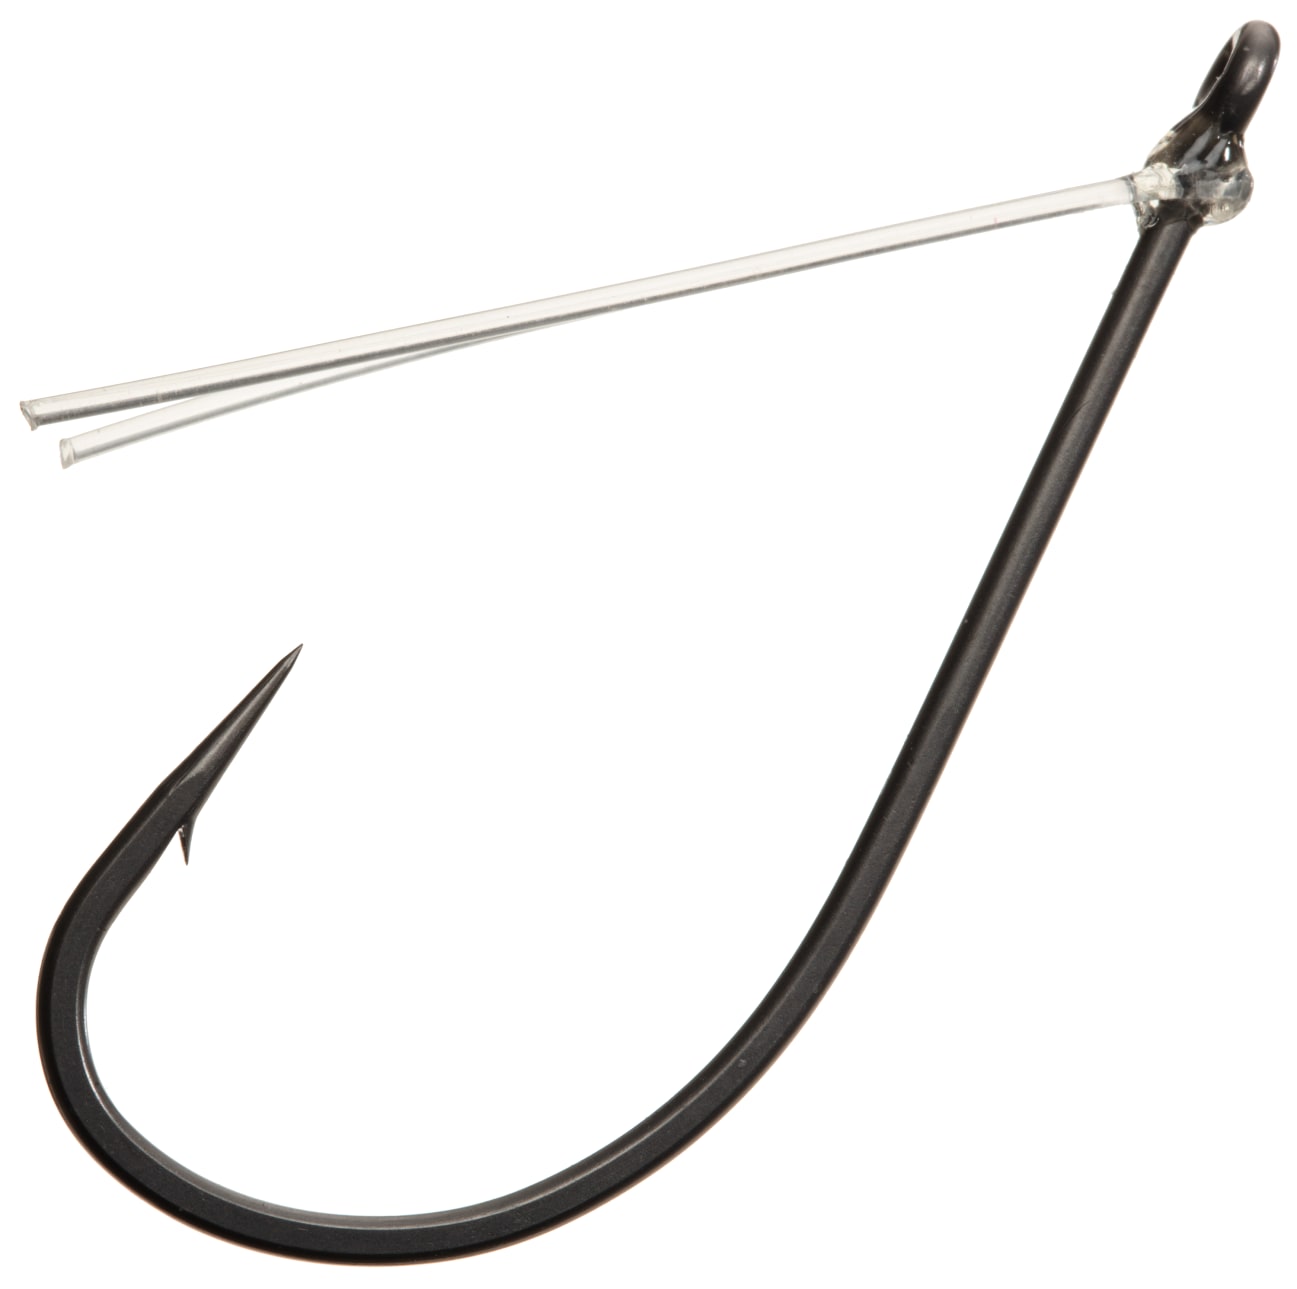 Ultrapoint TitanX hook from Mustad